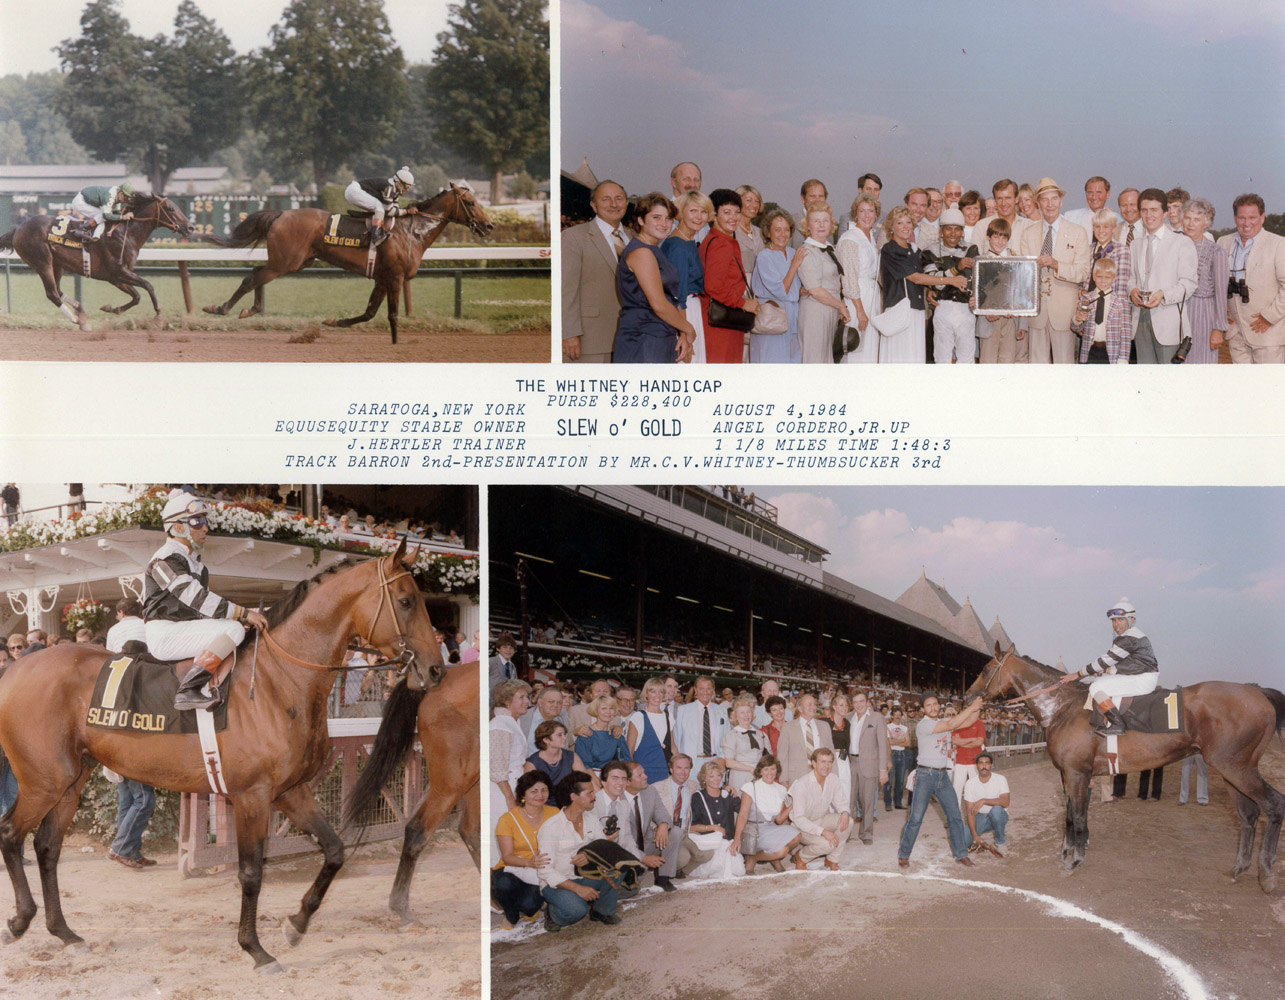 Win composite photograph for the 1984 Whitney Handicap at Saratoga, won by Slew o' Gold with Angel Cordero up (NYRA/Museum Collection)